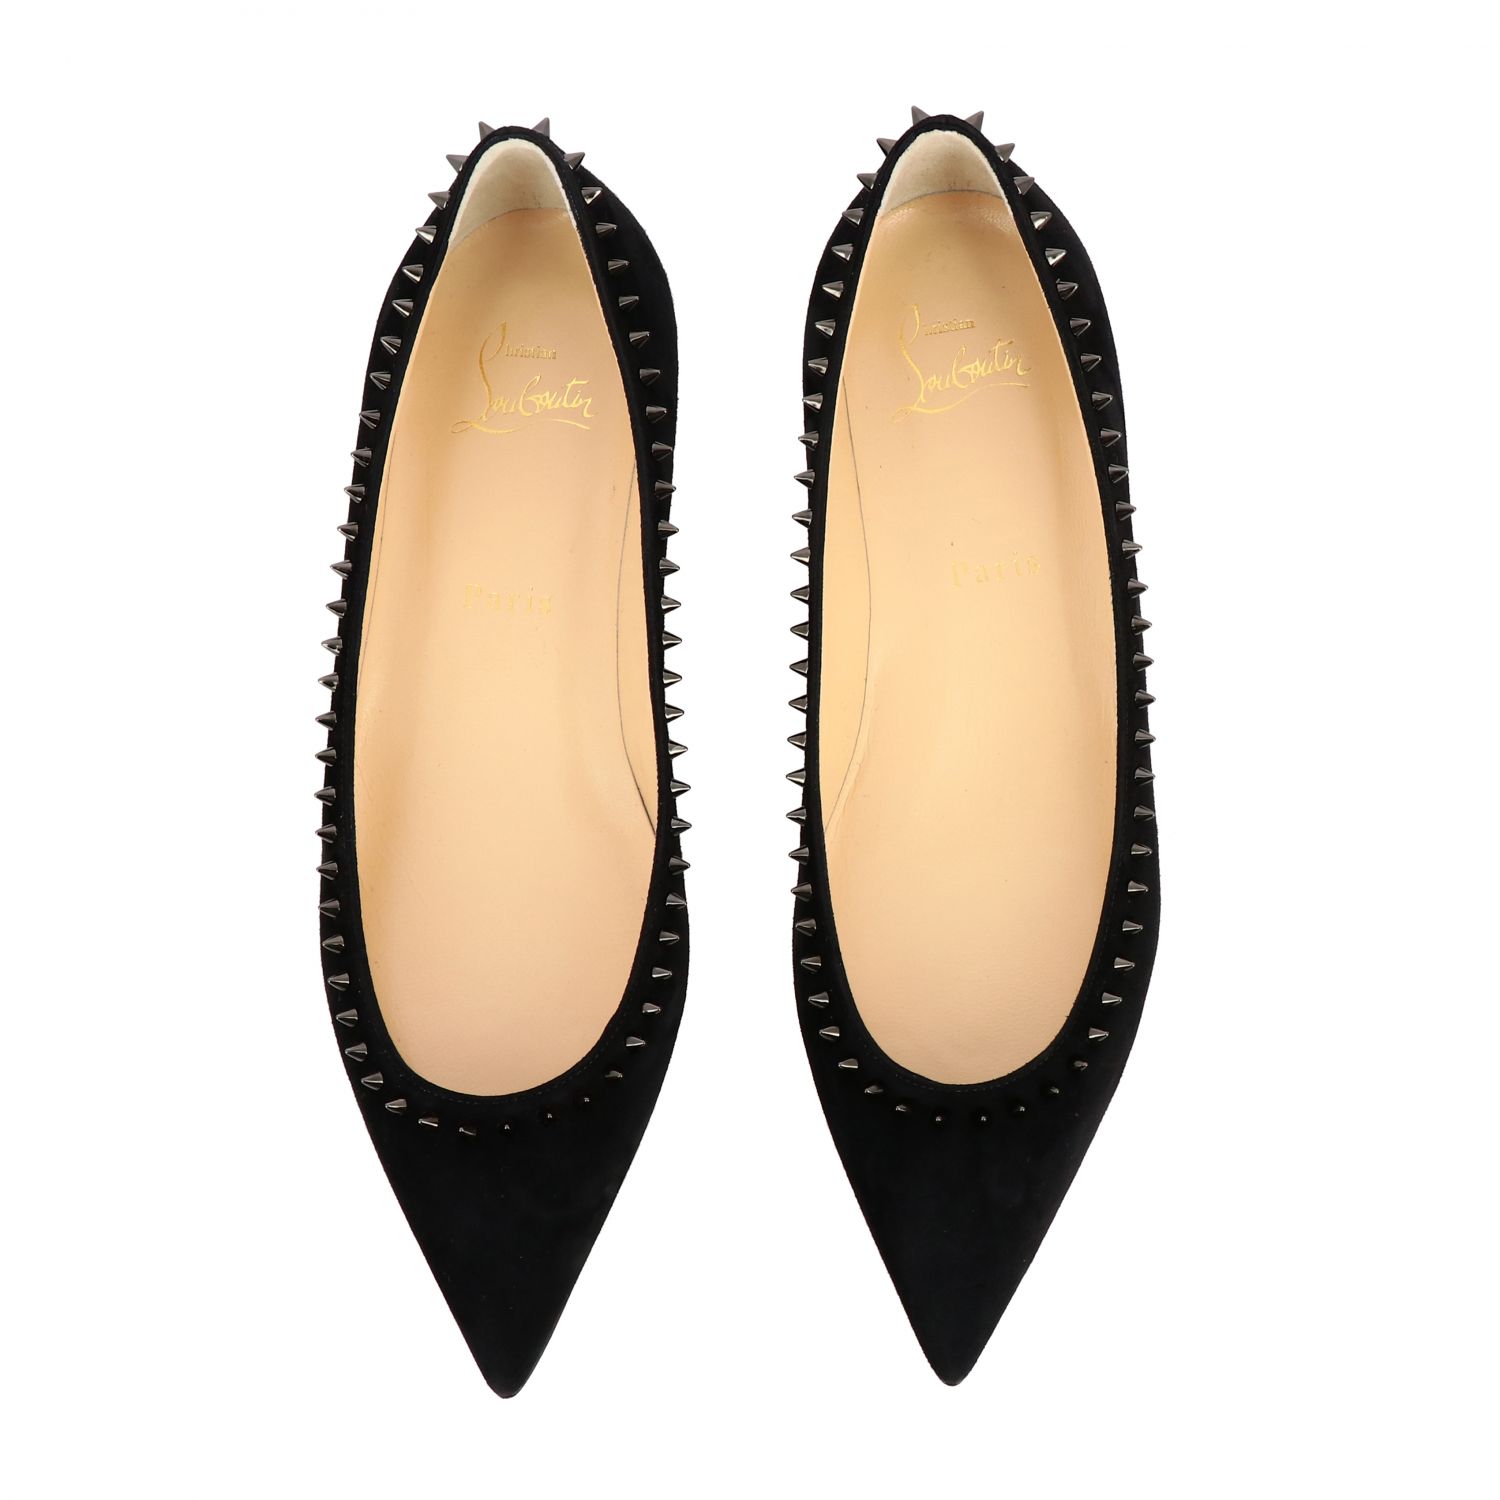 CHRISTIAN LOUBOUTIN: Anjalina ballet flat in suede with studs | Ballet ...